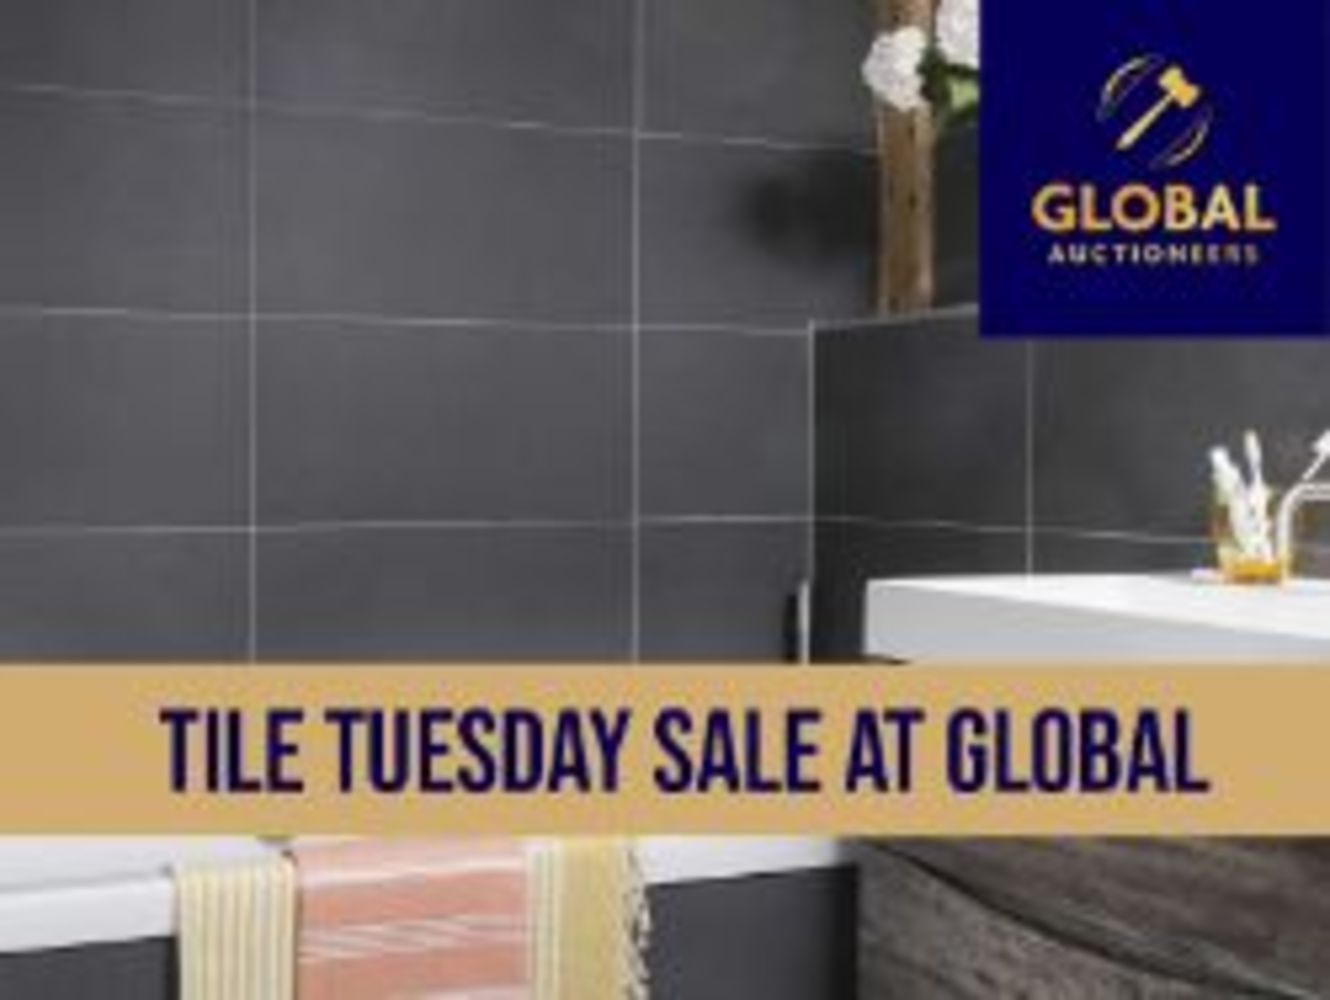 No Reserve - Tile Tuesday - “over £80k worth of tiles – Sourced from Johnsons Tiles” - 27th July 2021